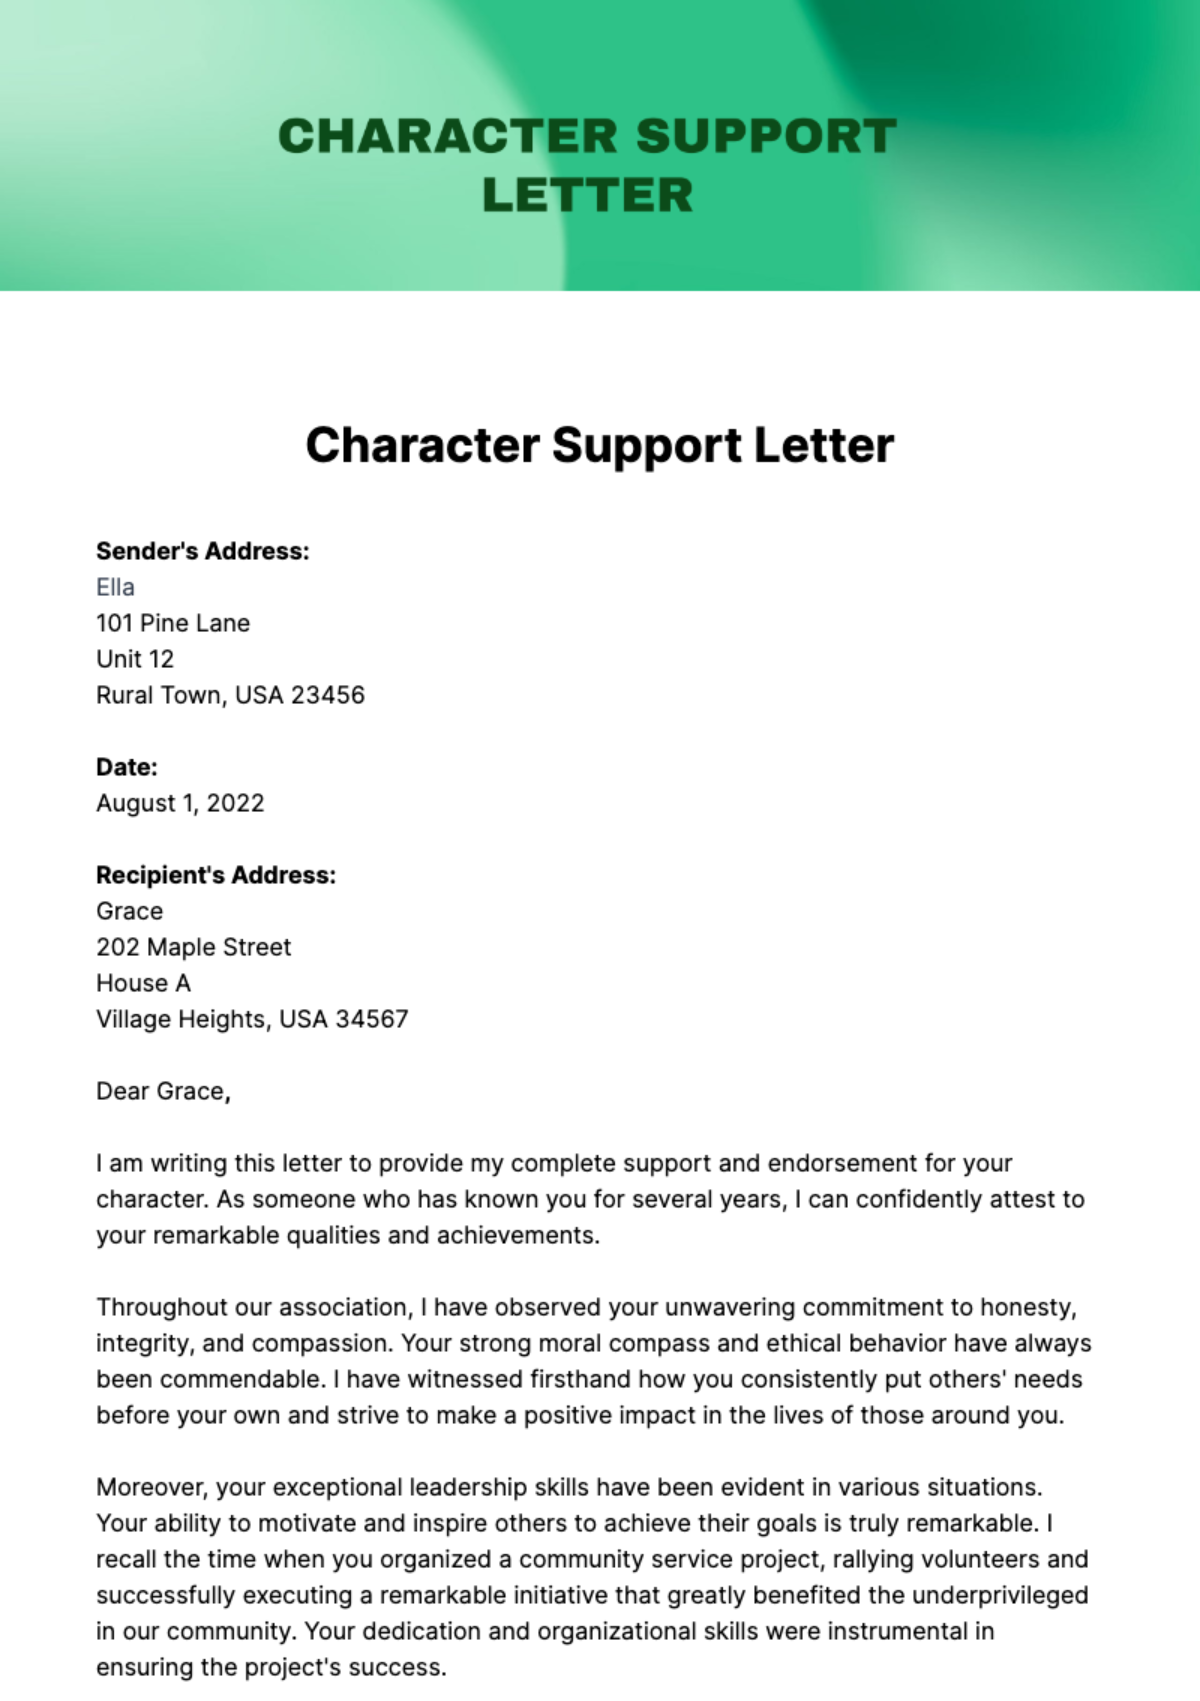 Character Support Letter Template